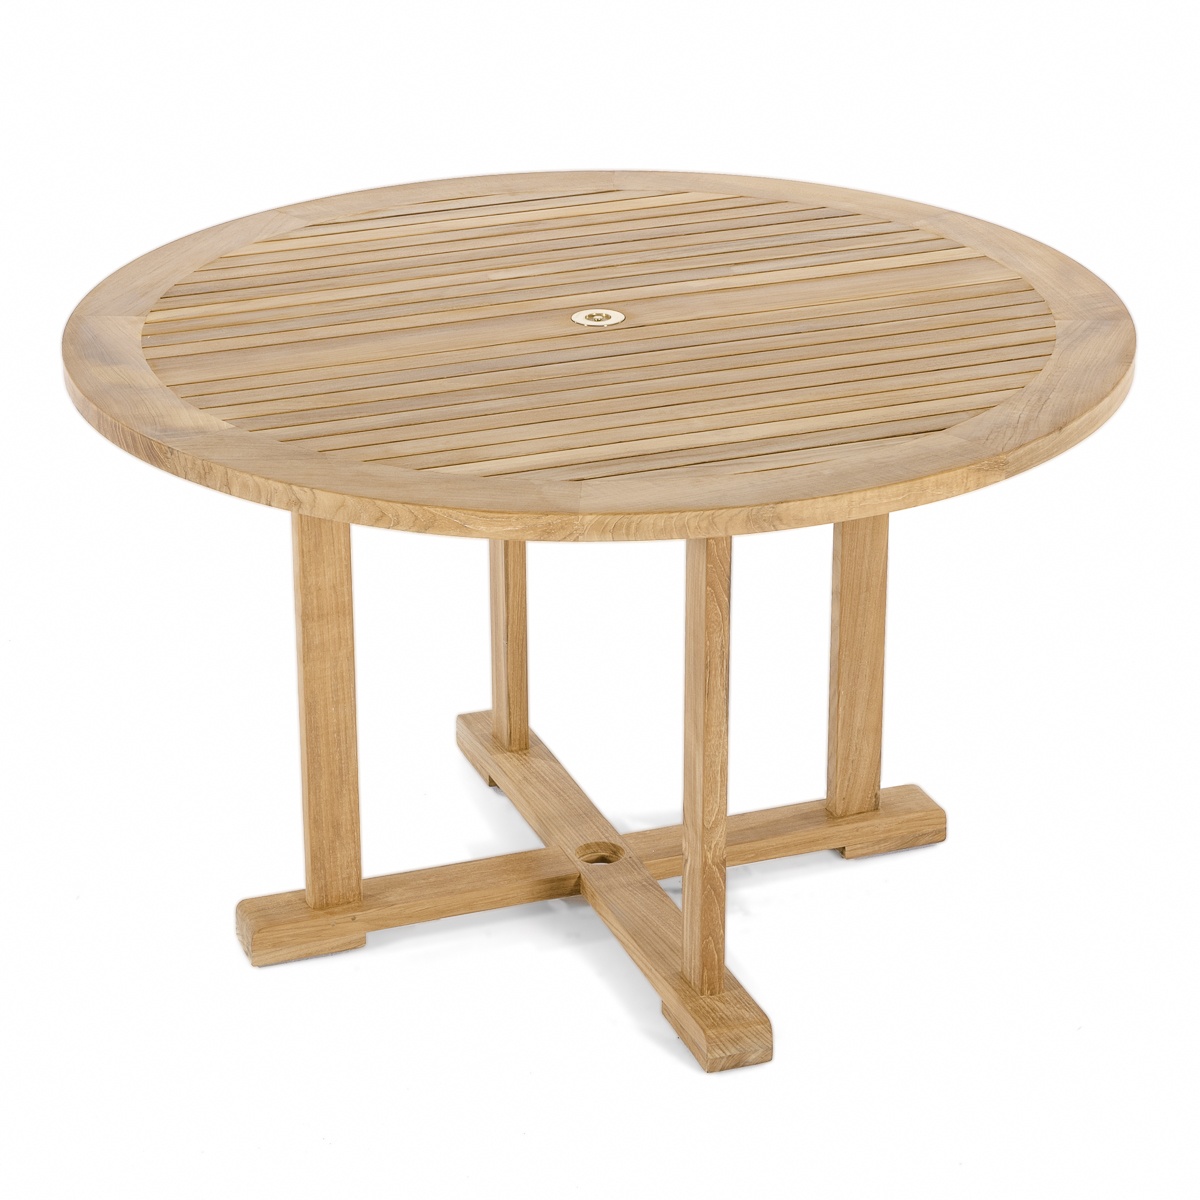 48 In Round Teak Table Westminster, 48 Round Teak Outdoor Coffee Table